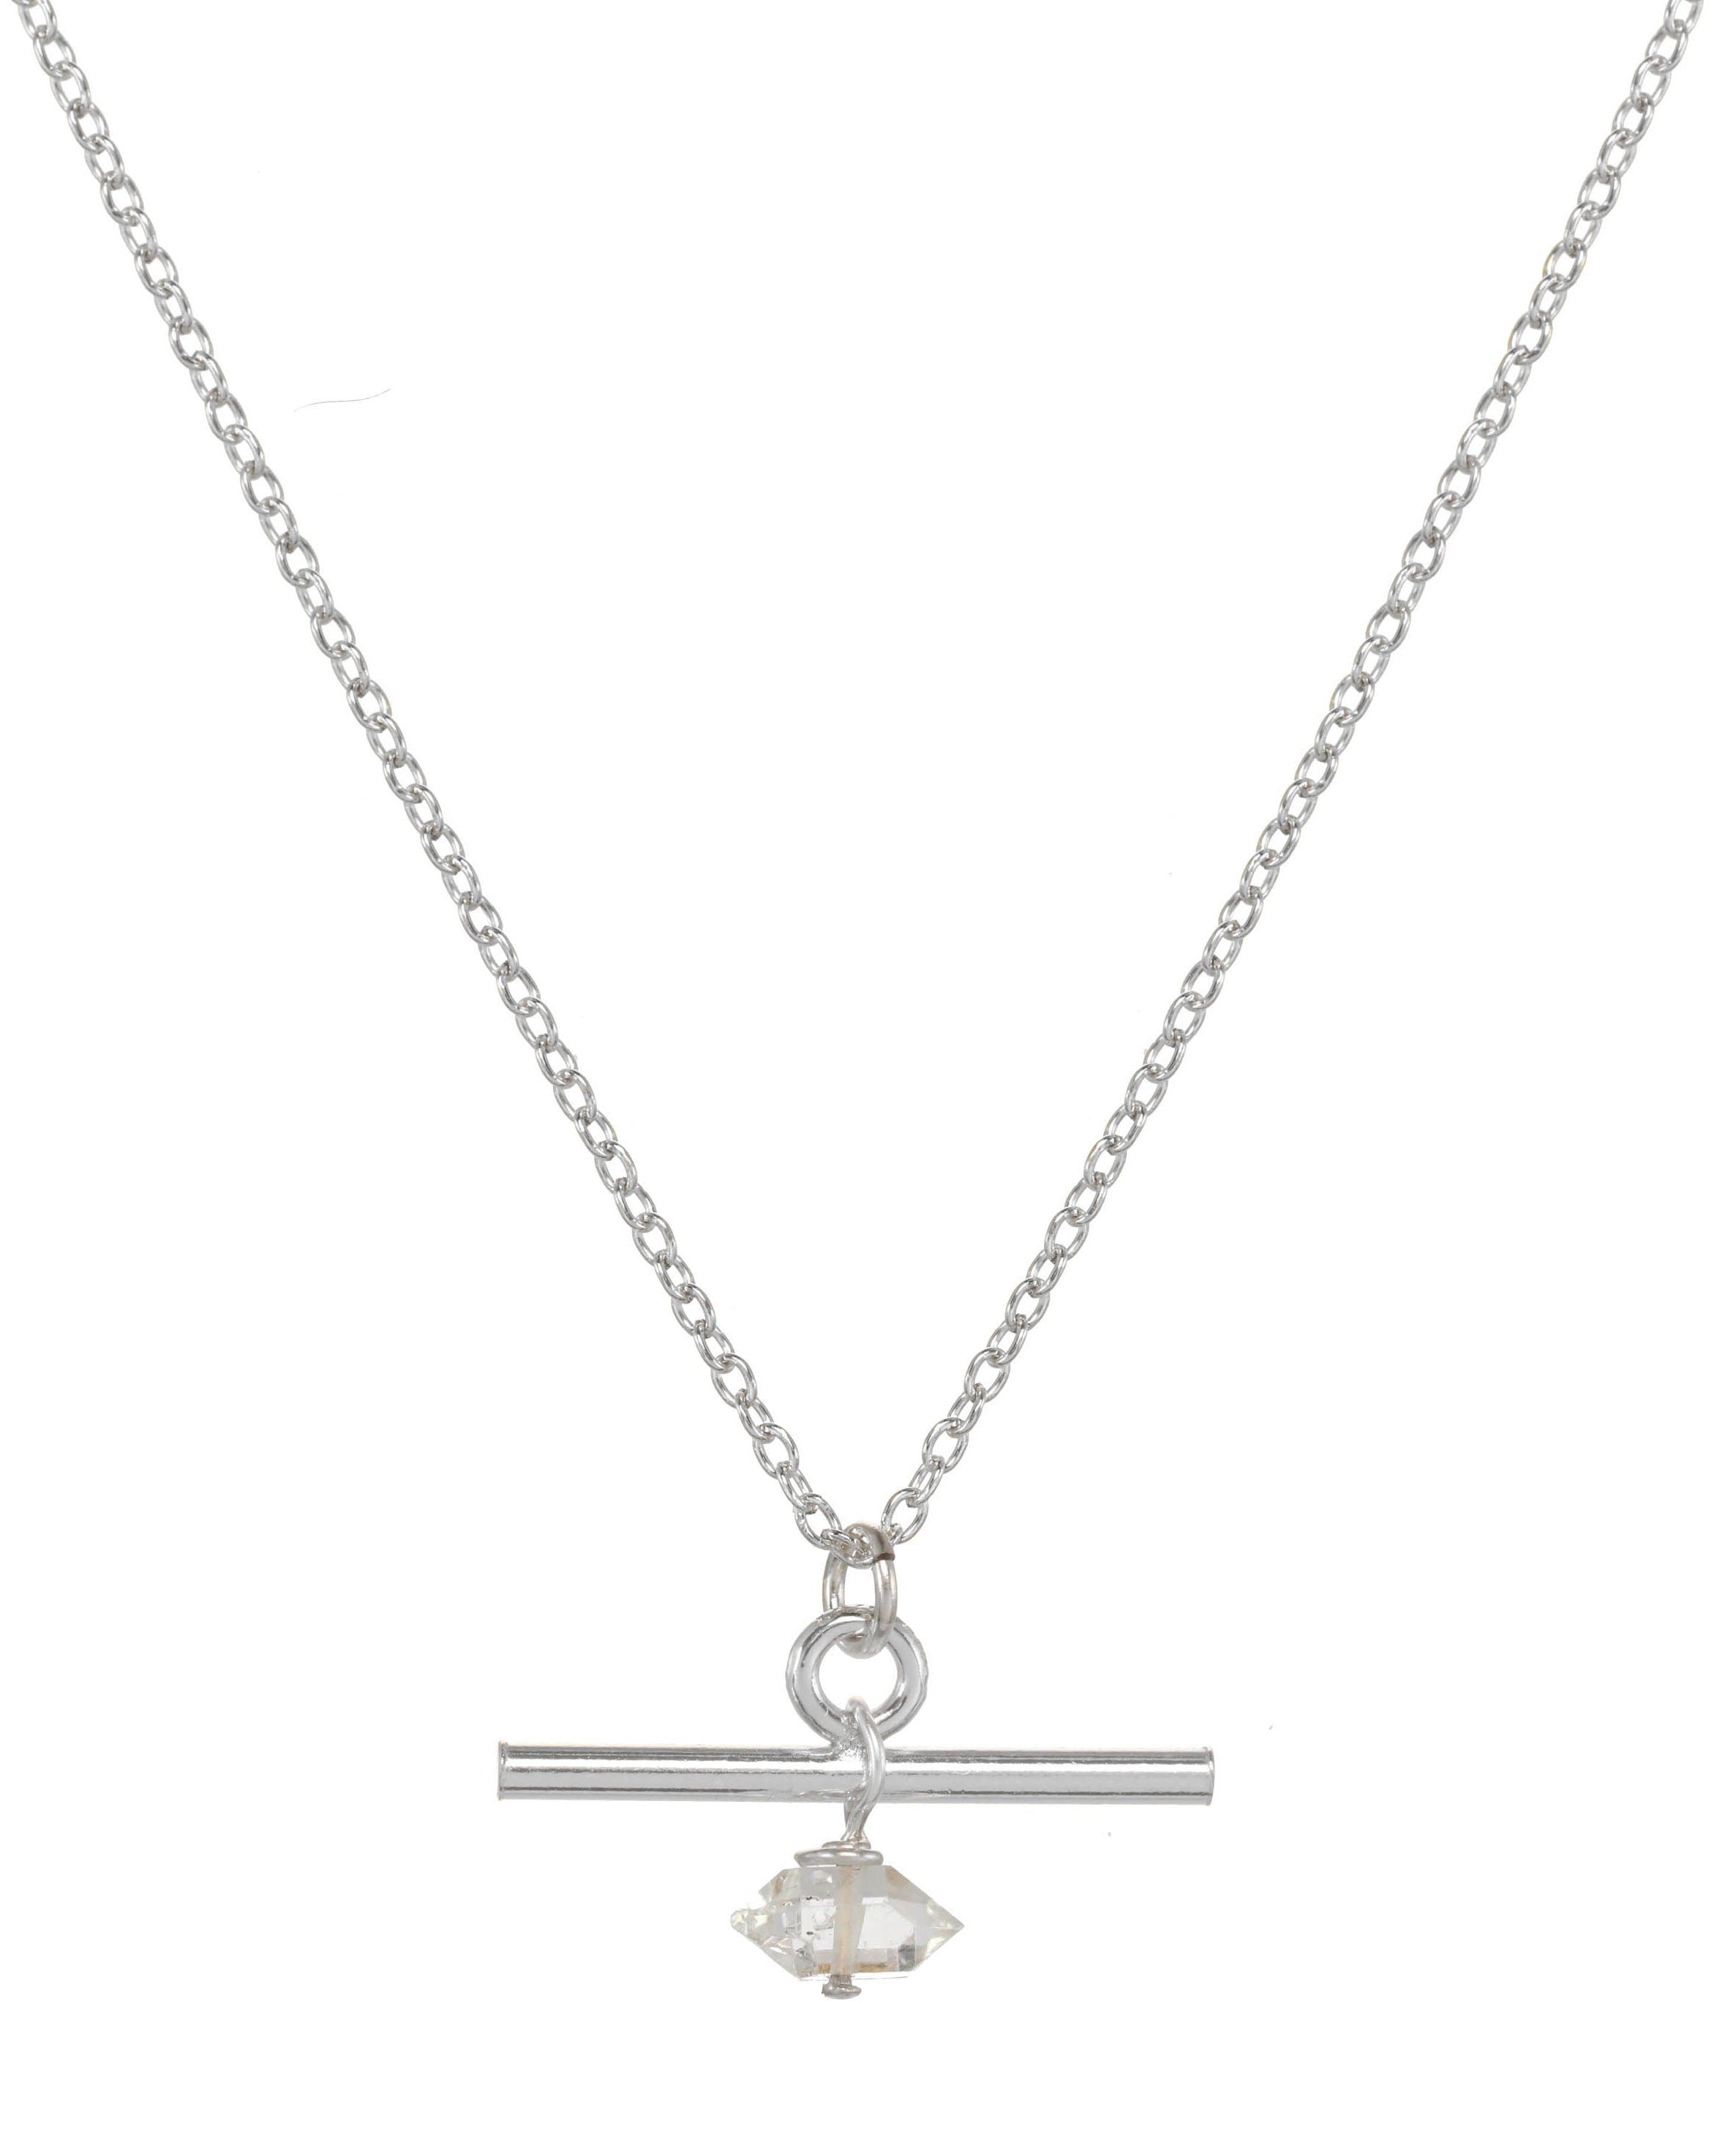 Celta Herkimer Necklace by KOZAKH. A 16 to 18 inch adjustable length necklace in Sterling Silver, featuring a Herkimer Diamond.